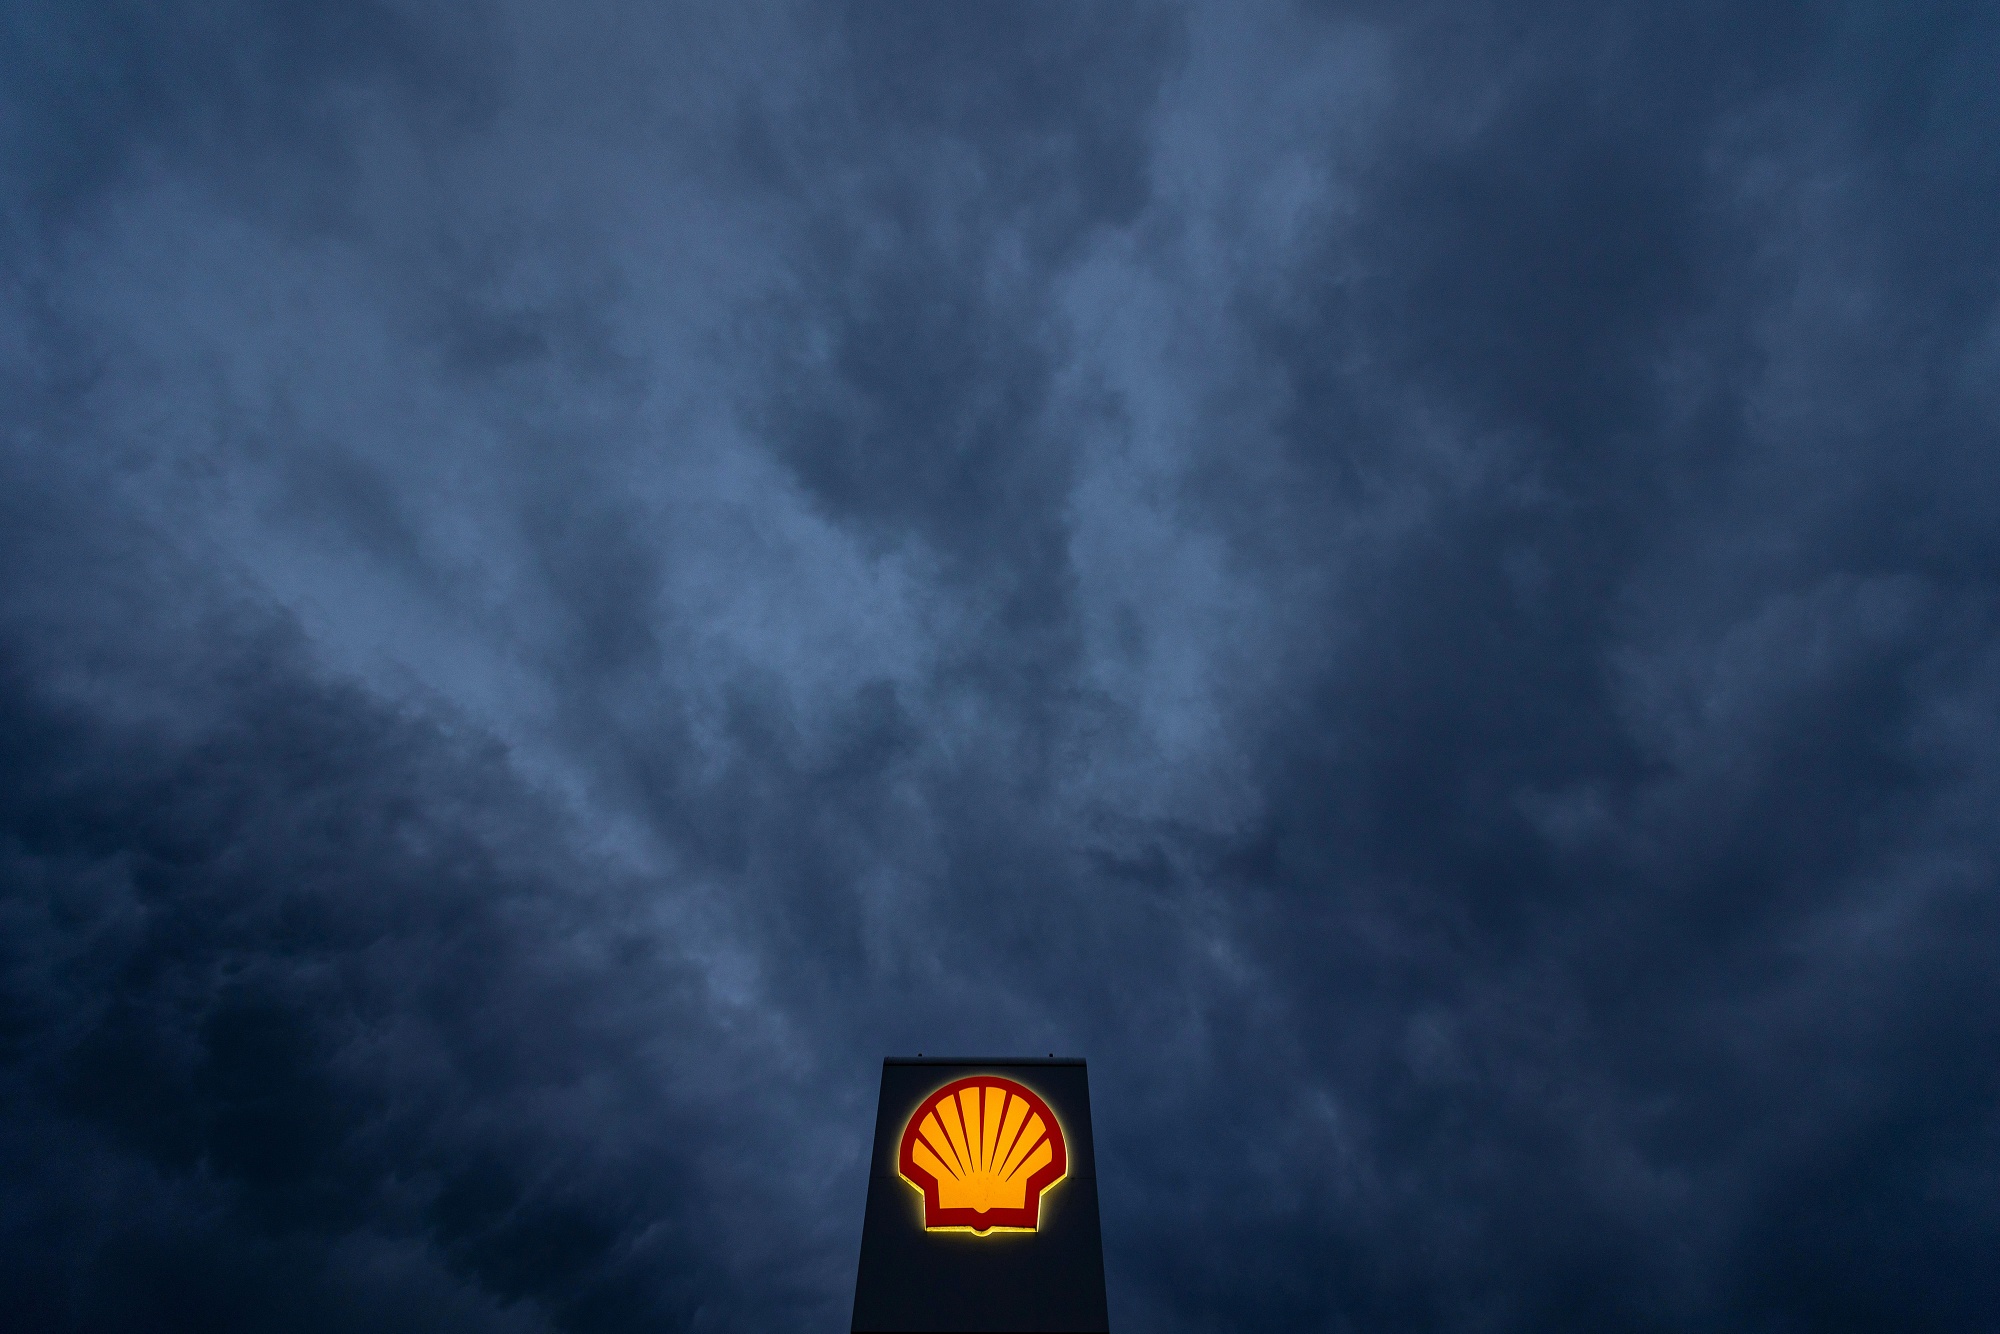 Shell Plc has walked back its once-ambitious plans to develop millions of carbon offsets projects around the world.&nbsp;